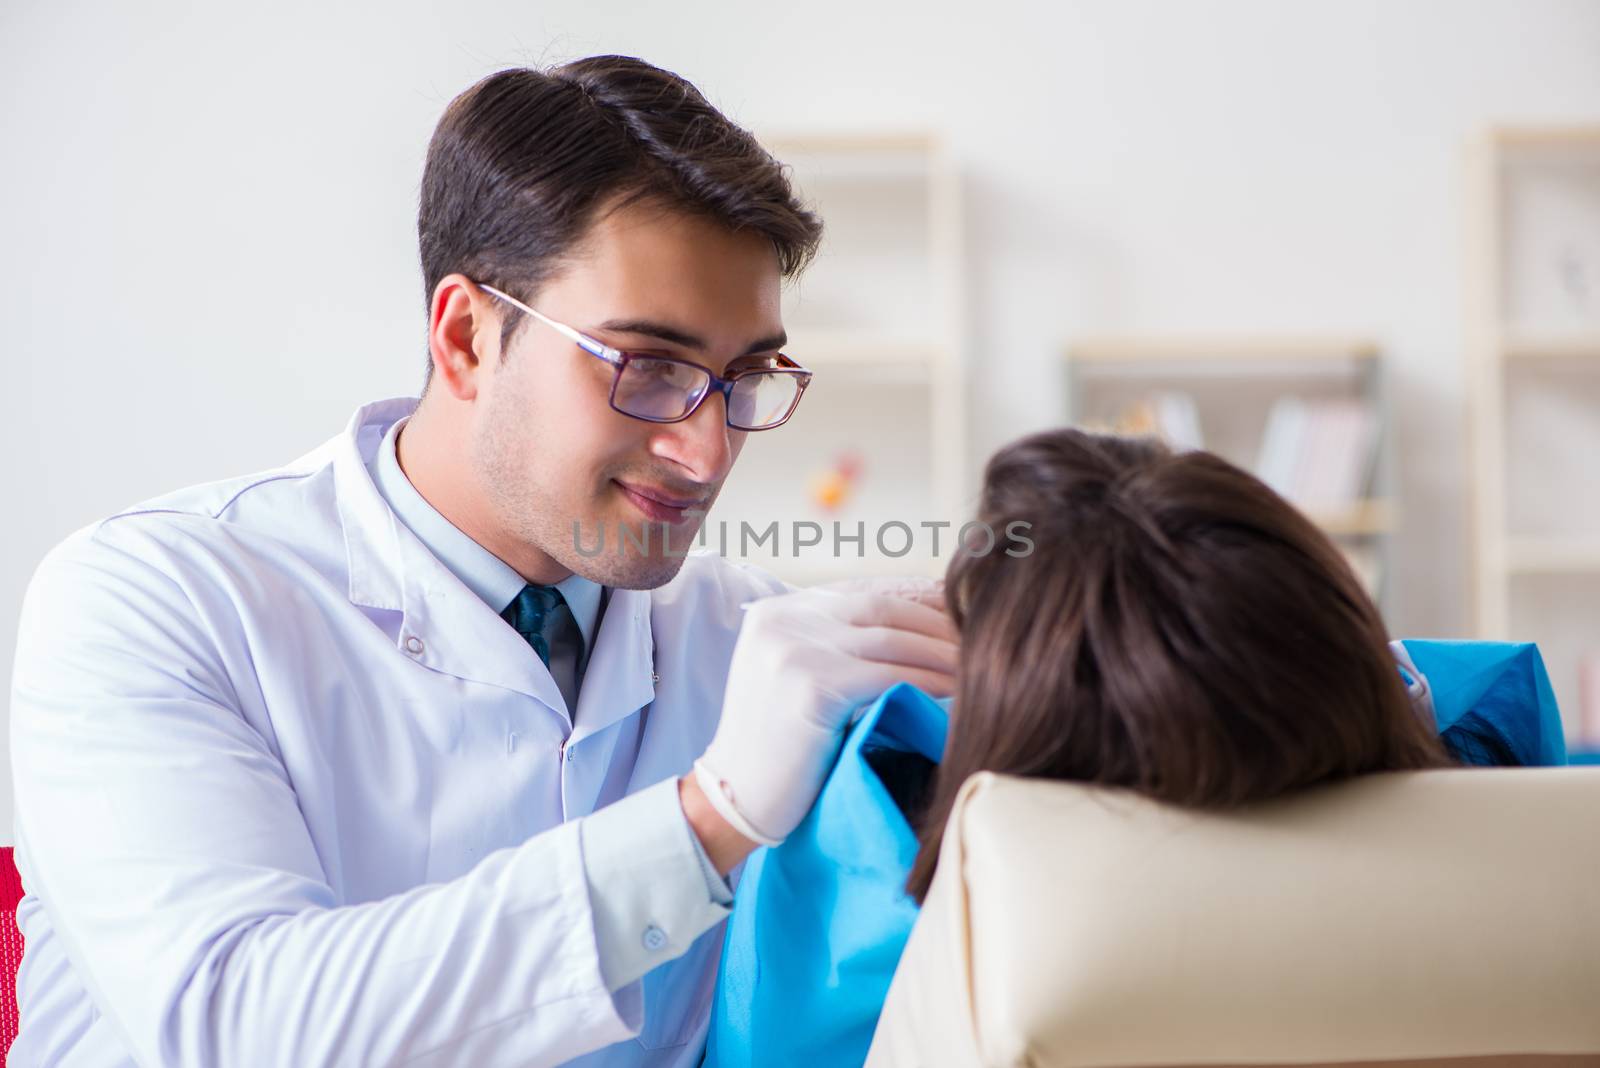 Patient visiting dentist for regular check-up and filling by Elnur